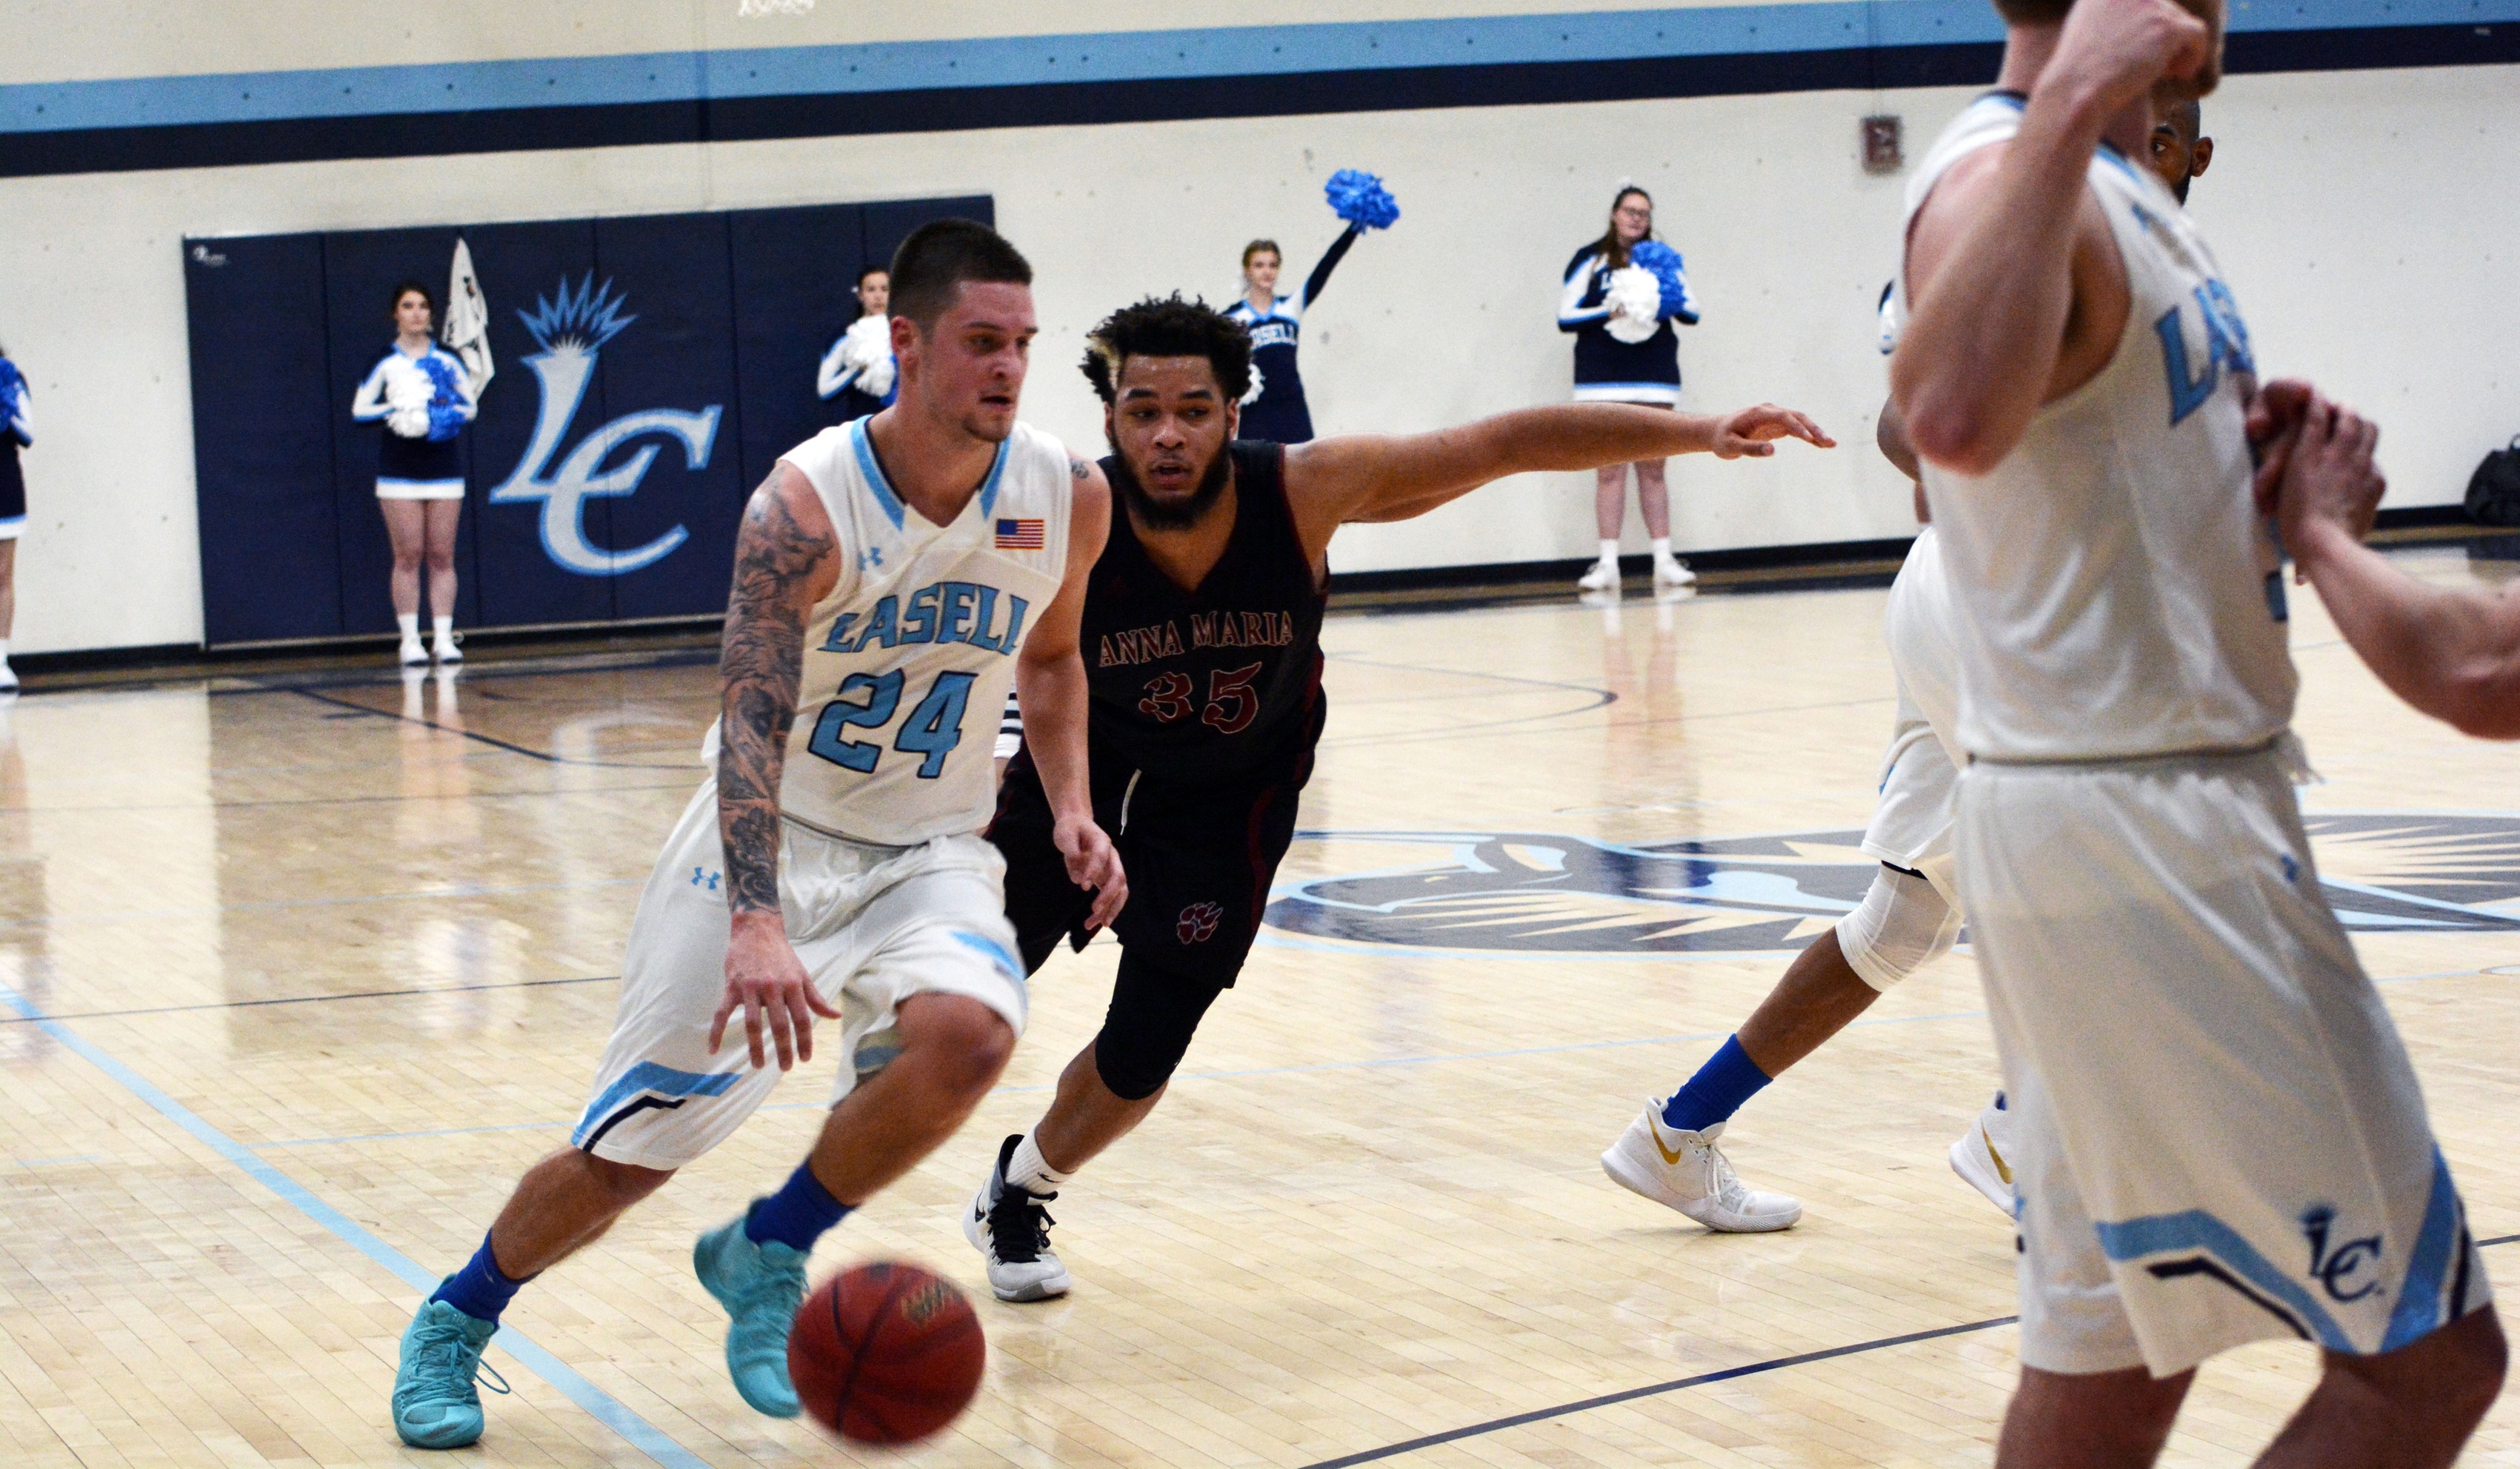 Lasell Men’s Basketball comes back to defeat Anna Maria